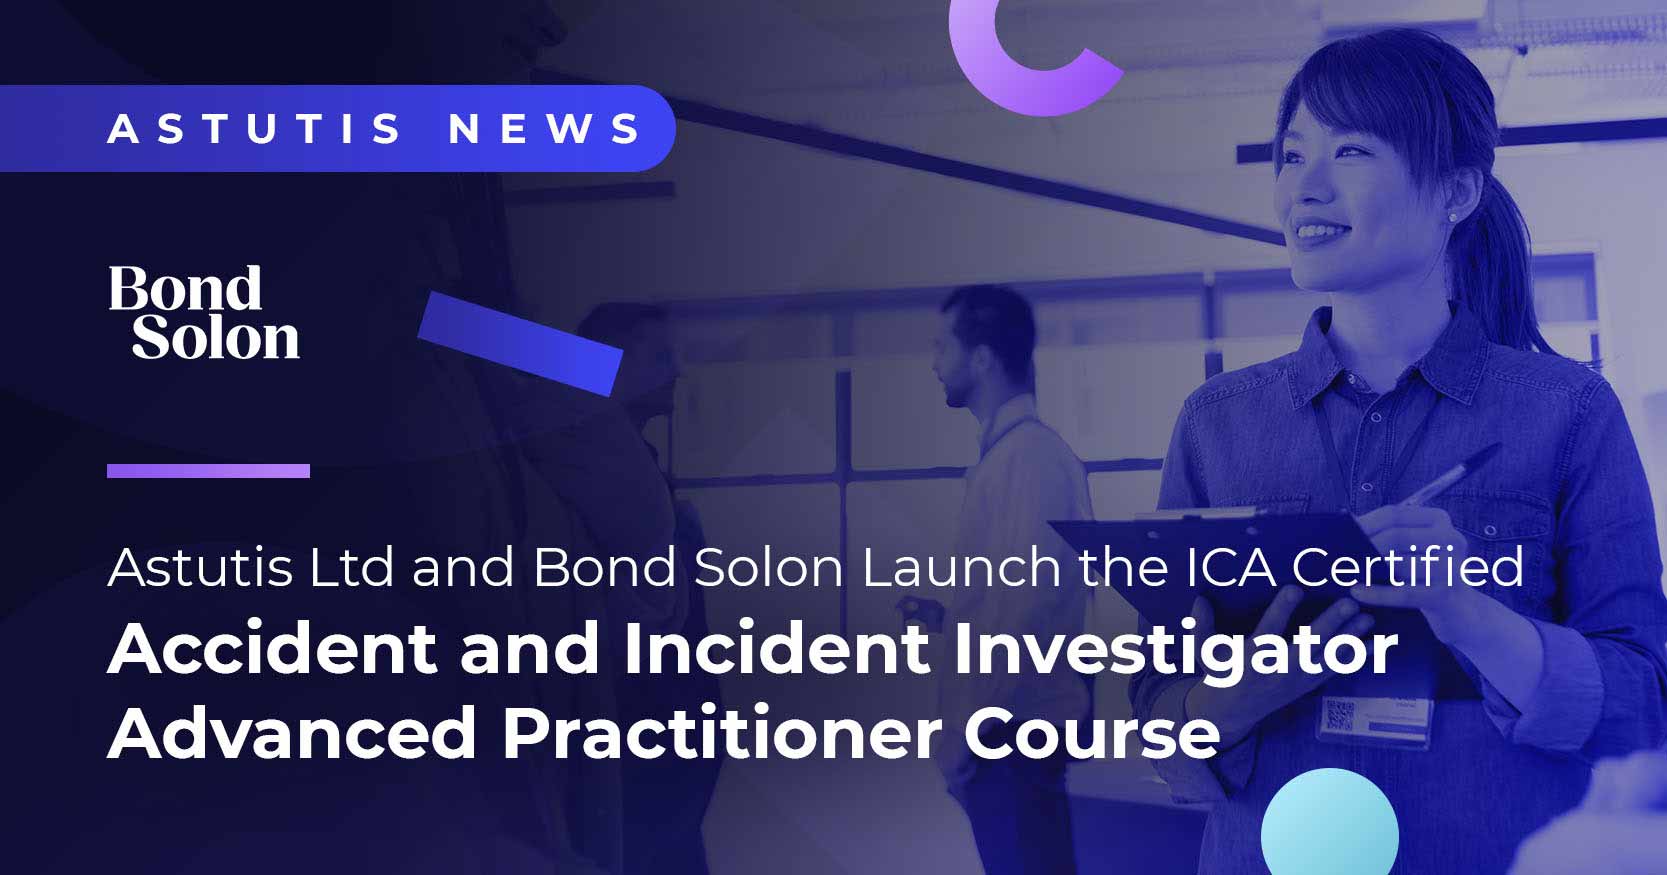 Astutis Ltd and Bond Solon Launch the ICA Certified Accident and Incident Investigator Advanced Practitioner Course